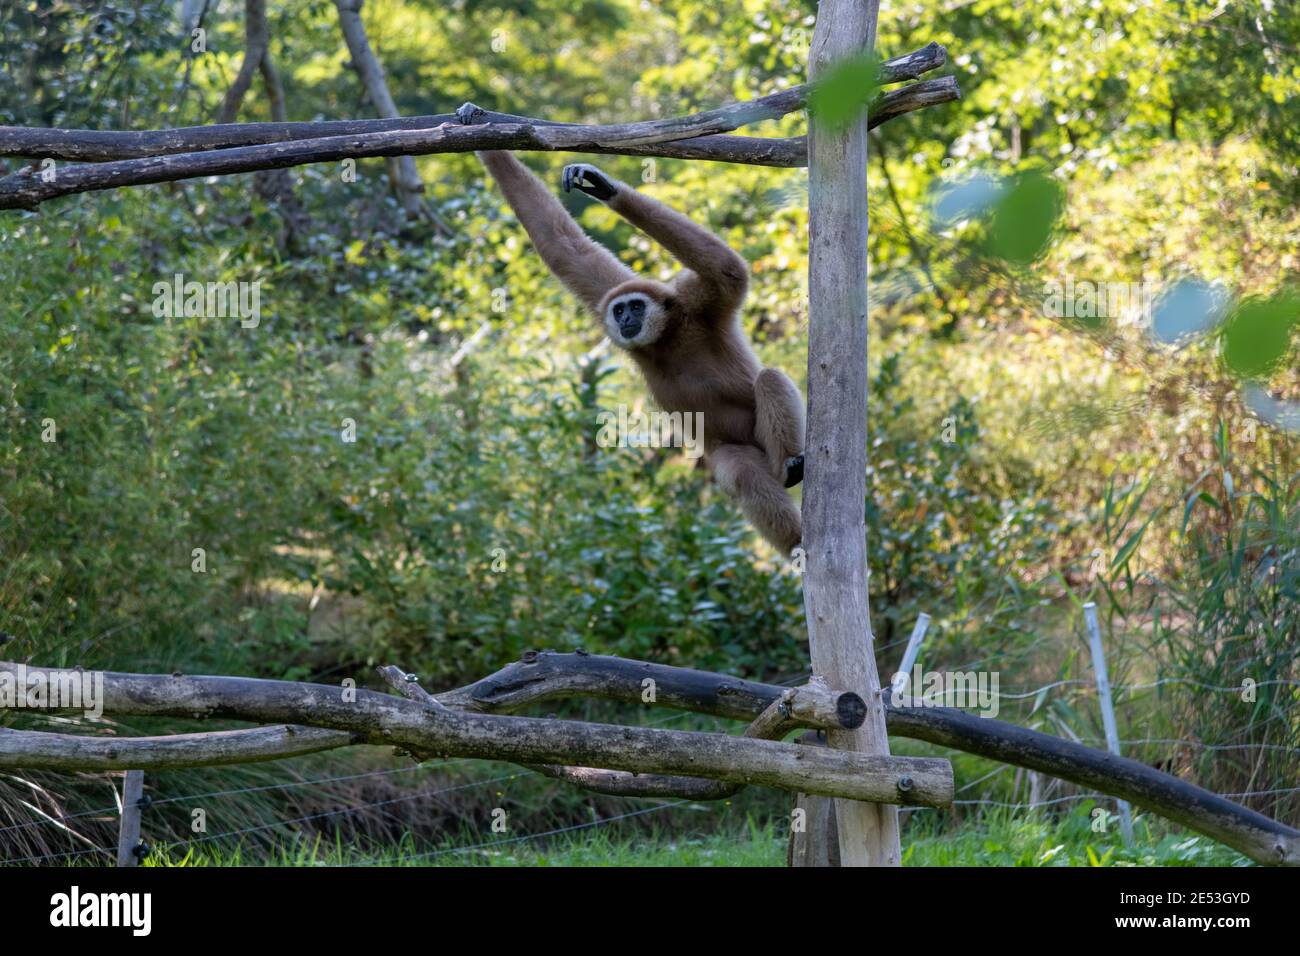 Swinging Gibbon hanging on branch from a climbing platform, motion of the monkey is frozen in place Stock Photo